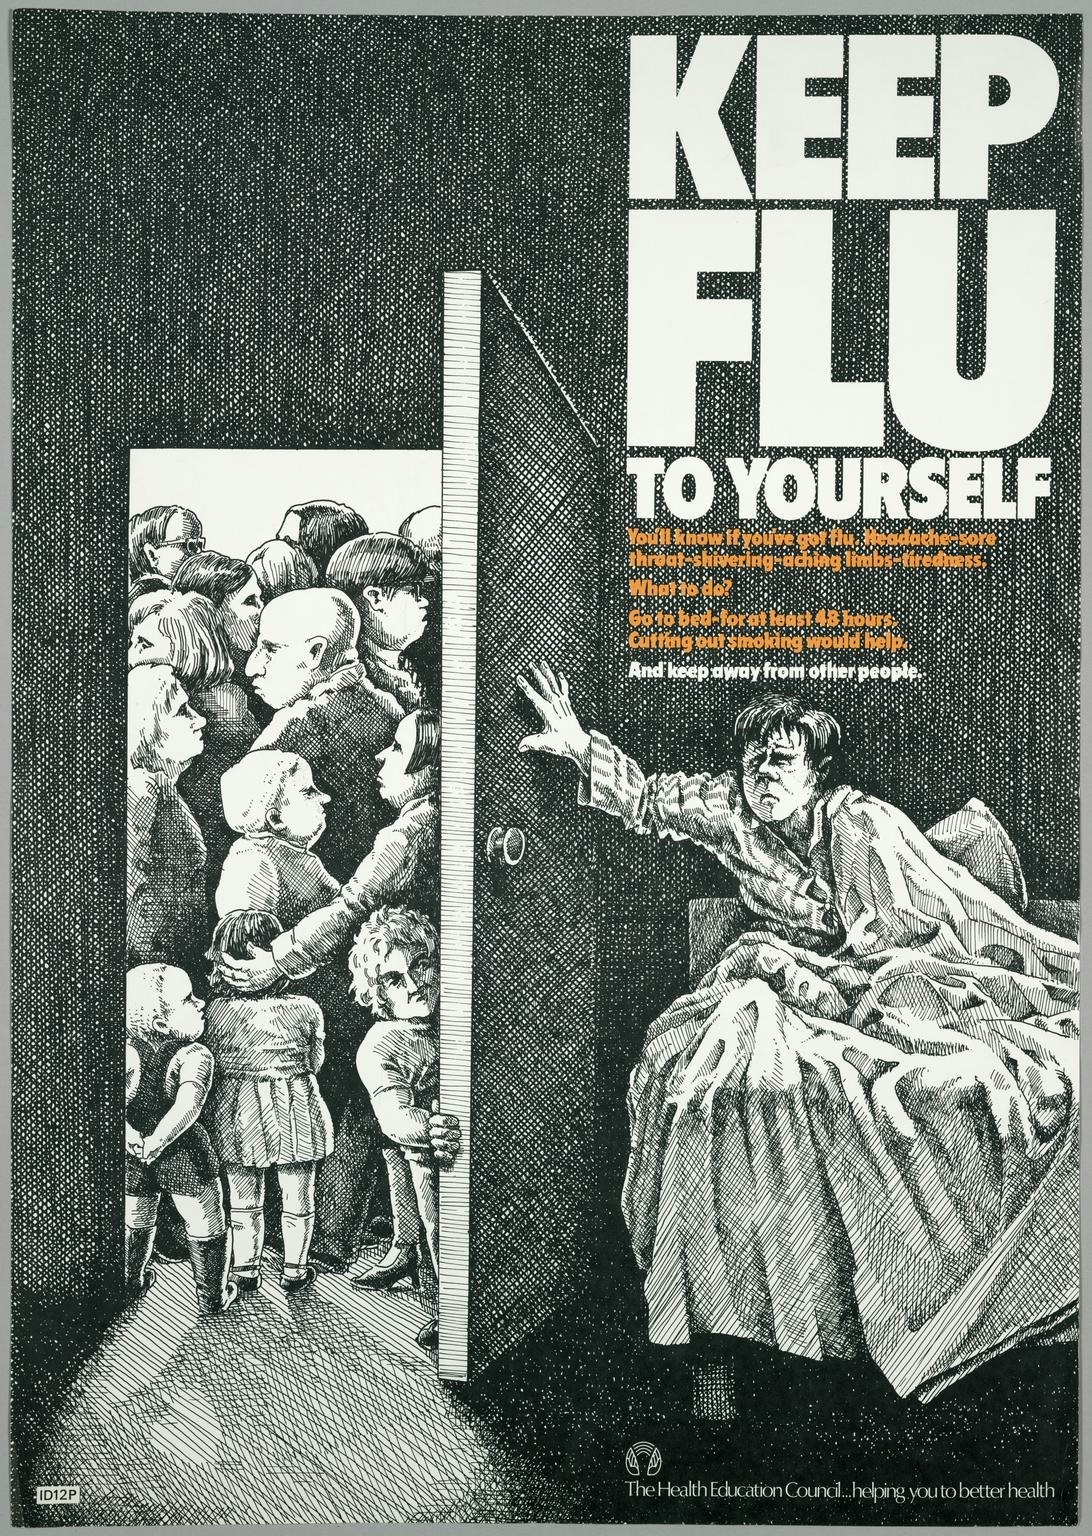 Black and white illustrated public health poster, with white and orange text. The illustration shows a man in bed, leaning over to shut a door. There is a crowd of people on the other side of the door. All of the people have their backs to the door but one person is leaning into the room where the man is in bed. The slogan in the right hand corner reads, in capital letters, Keep Flu To Yourself.